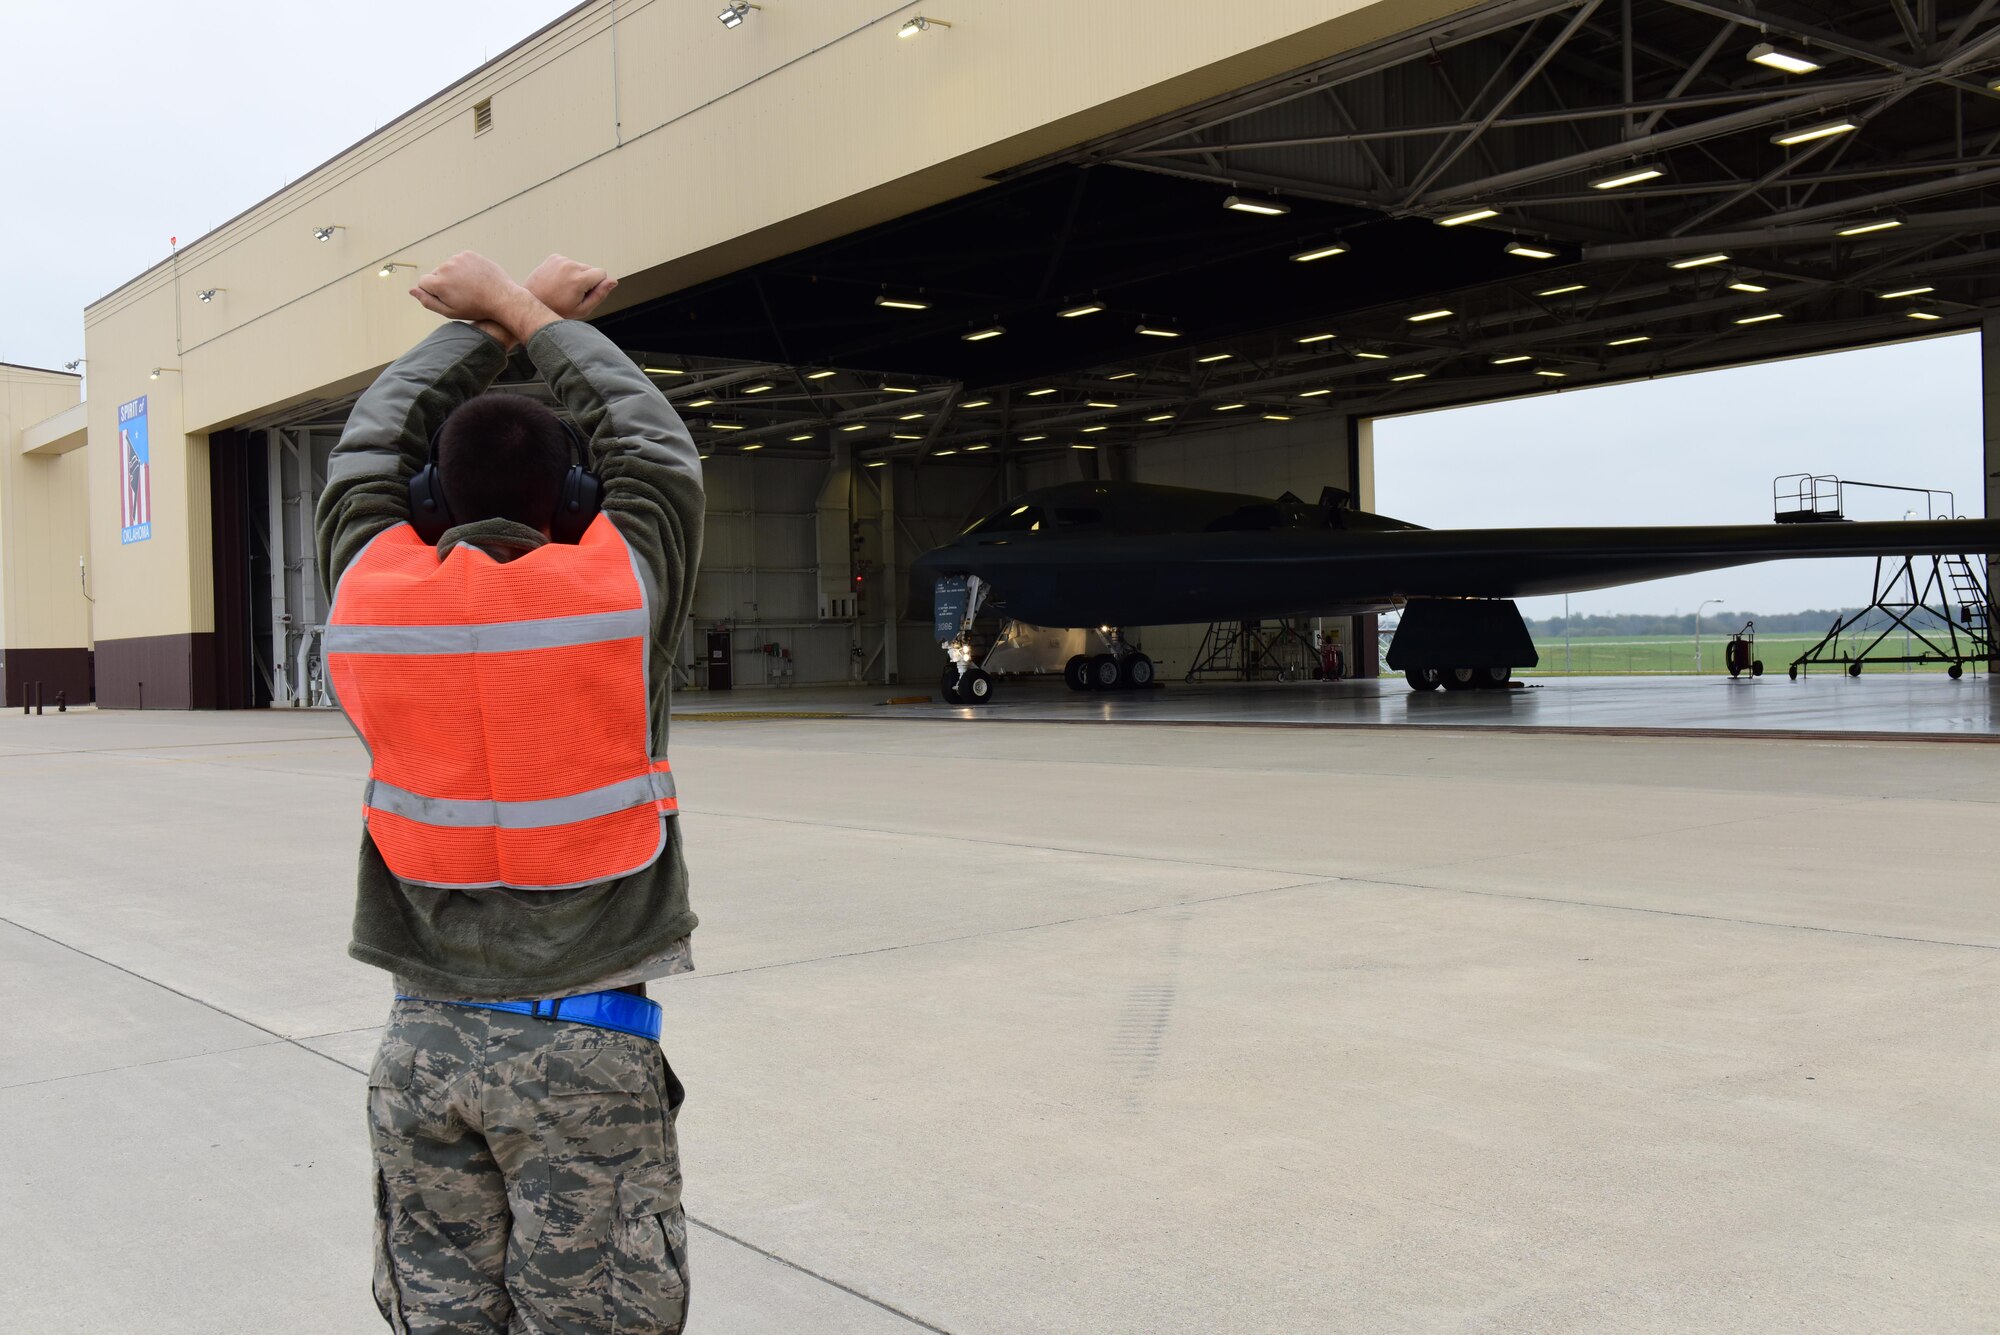 A crew chief assigned to the 509th Aircraft Maintenance Squadron  marshalls a B-2 Spirit out of its dock during Exercise Global Thunder 17 at Whiteman Air Force Base, Mo., Oct 30, 2016, during exercise Global Thunder 17. AFGSC supports U.S. Strategic Command's (USSTRATCOM) global strike and nuclear deterrence missions by providing strategic assets, including bombers like the B-52 and B-2, to ensure a safe, secure, effective and ready deterrent force. Global Thunder is an annual training event that assesses command and control functionality in all USSTRATCOM mission areas and affords component commands a venue to evaluate their joint operational readiness.(U.S. Air Force photo by Airman Michaela Slanchik)